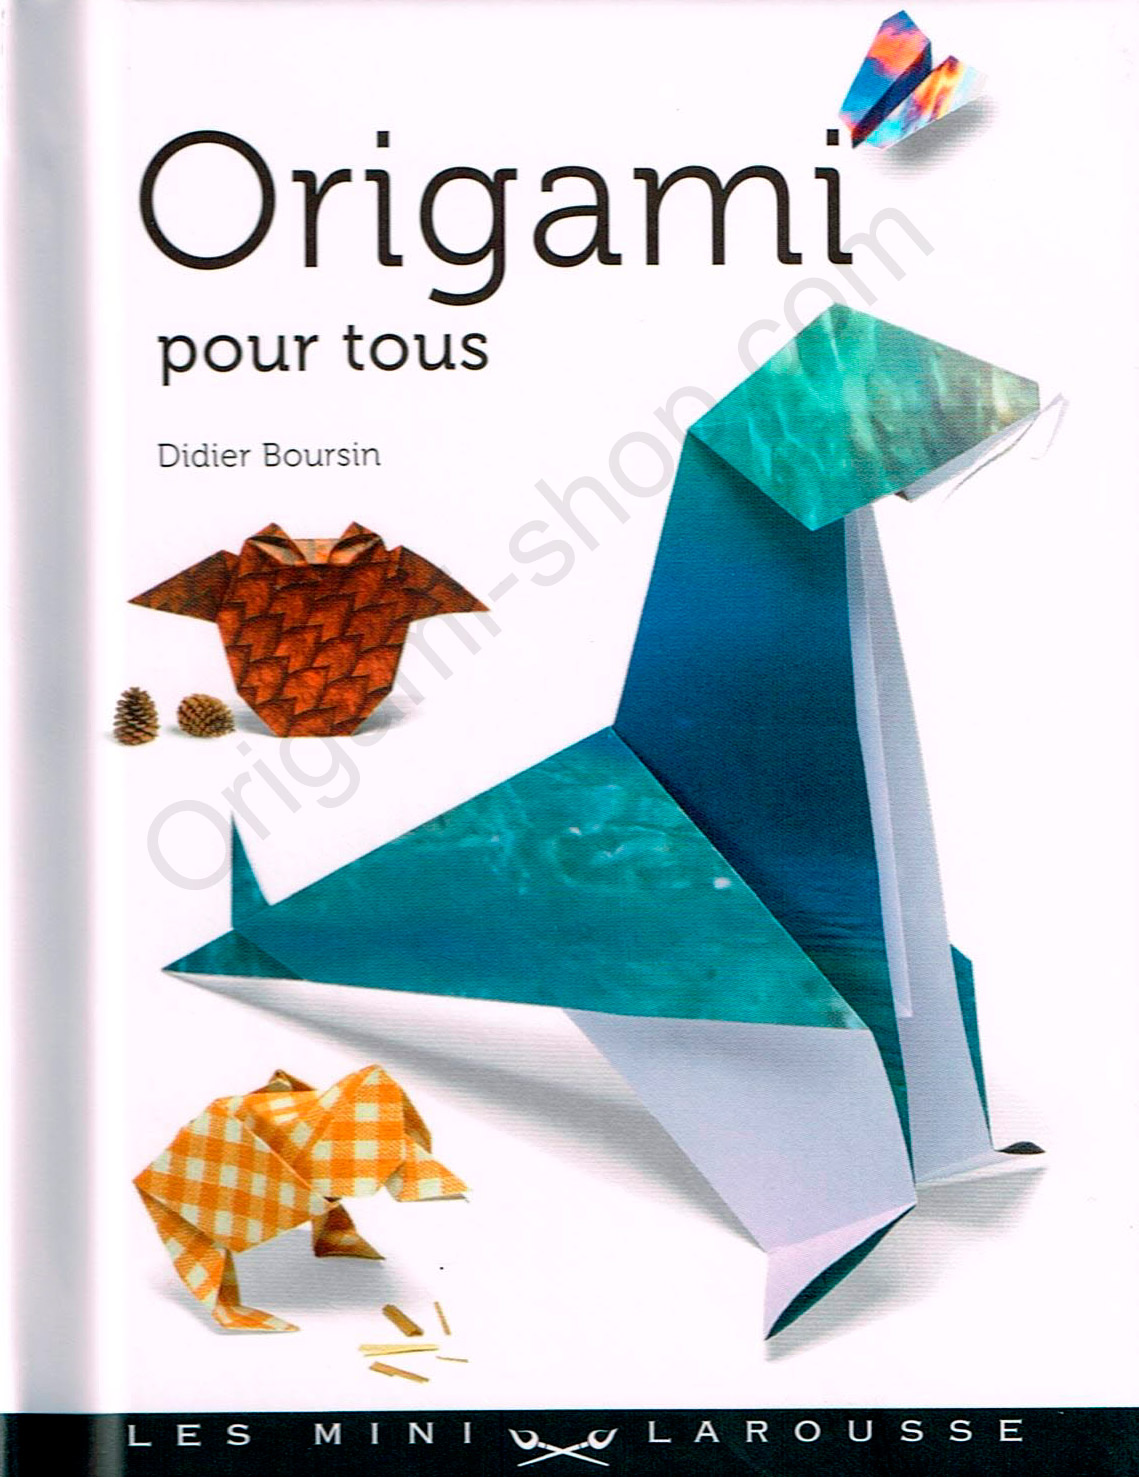 Origami Pour Tous (origami for all)